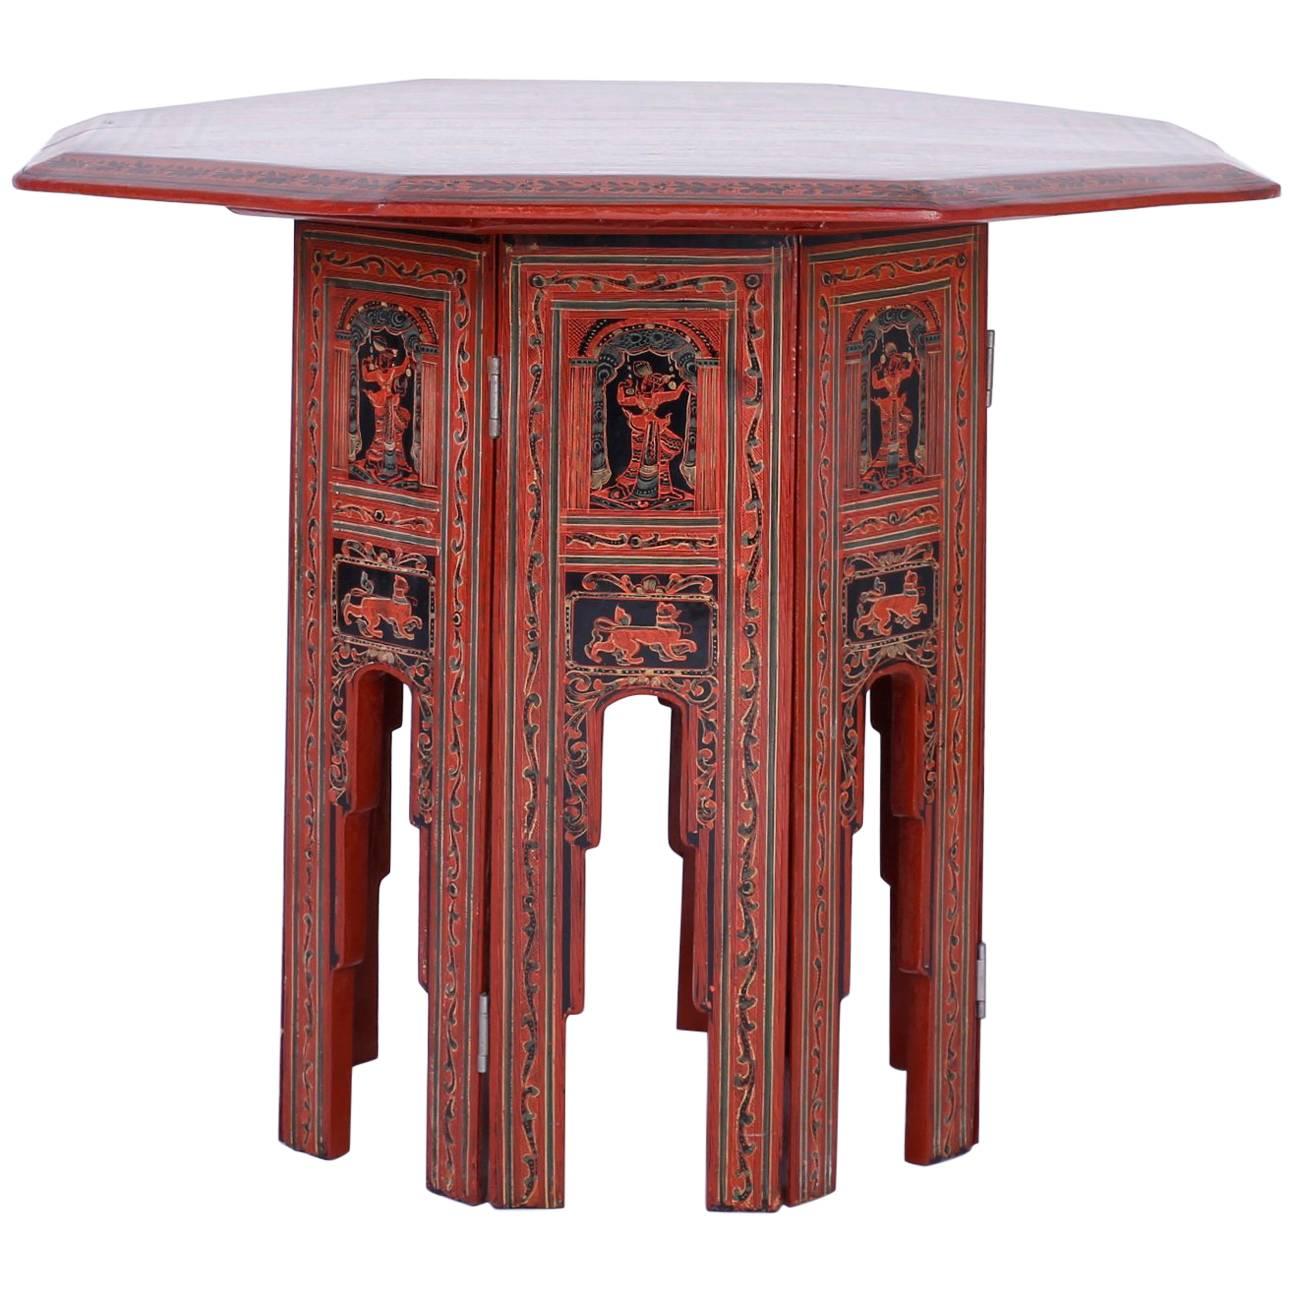 Exotic Thai Hand-Painted Table